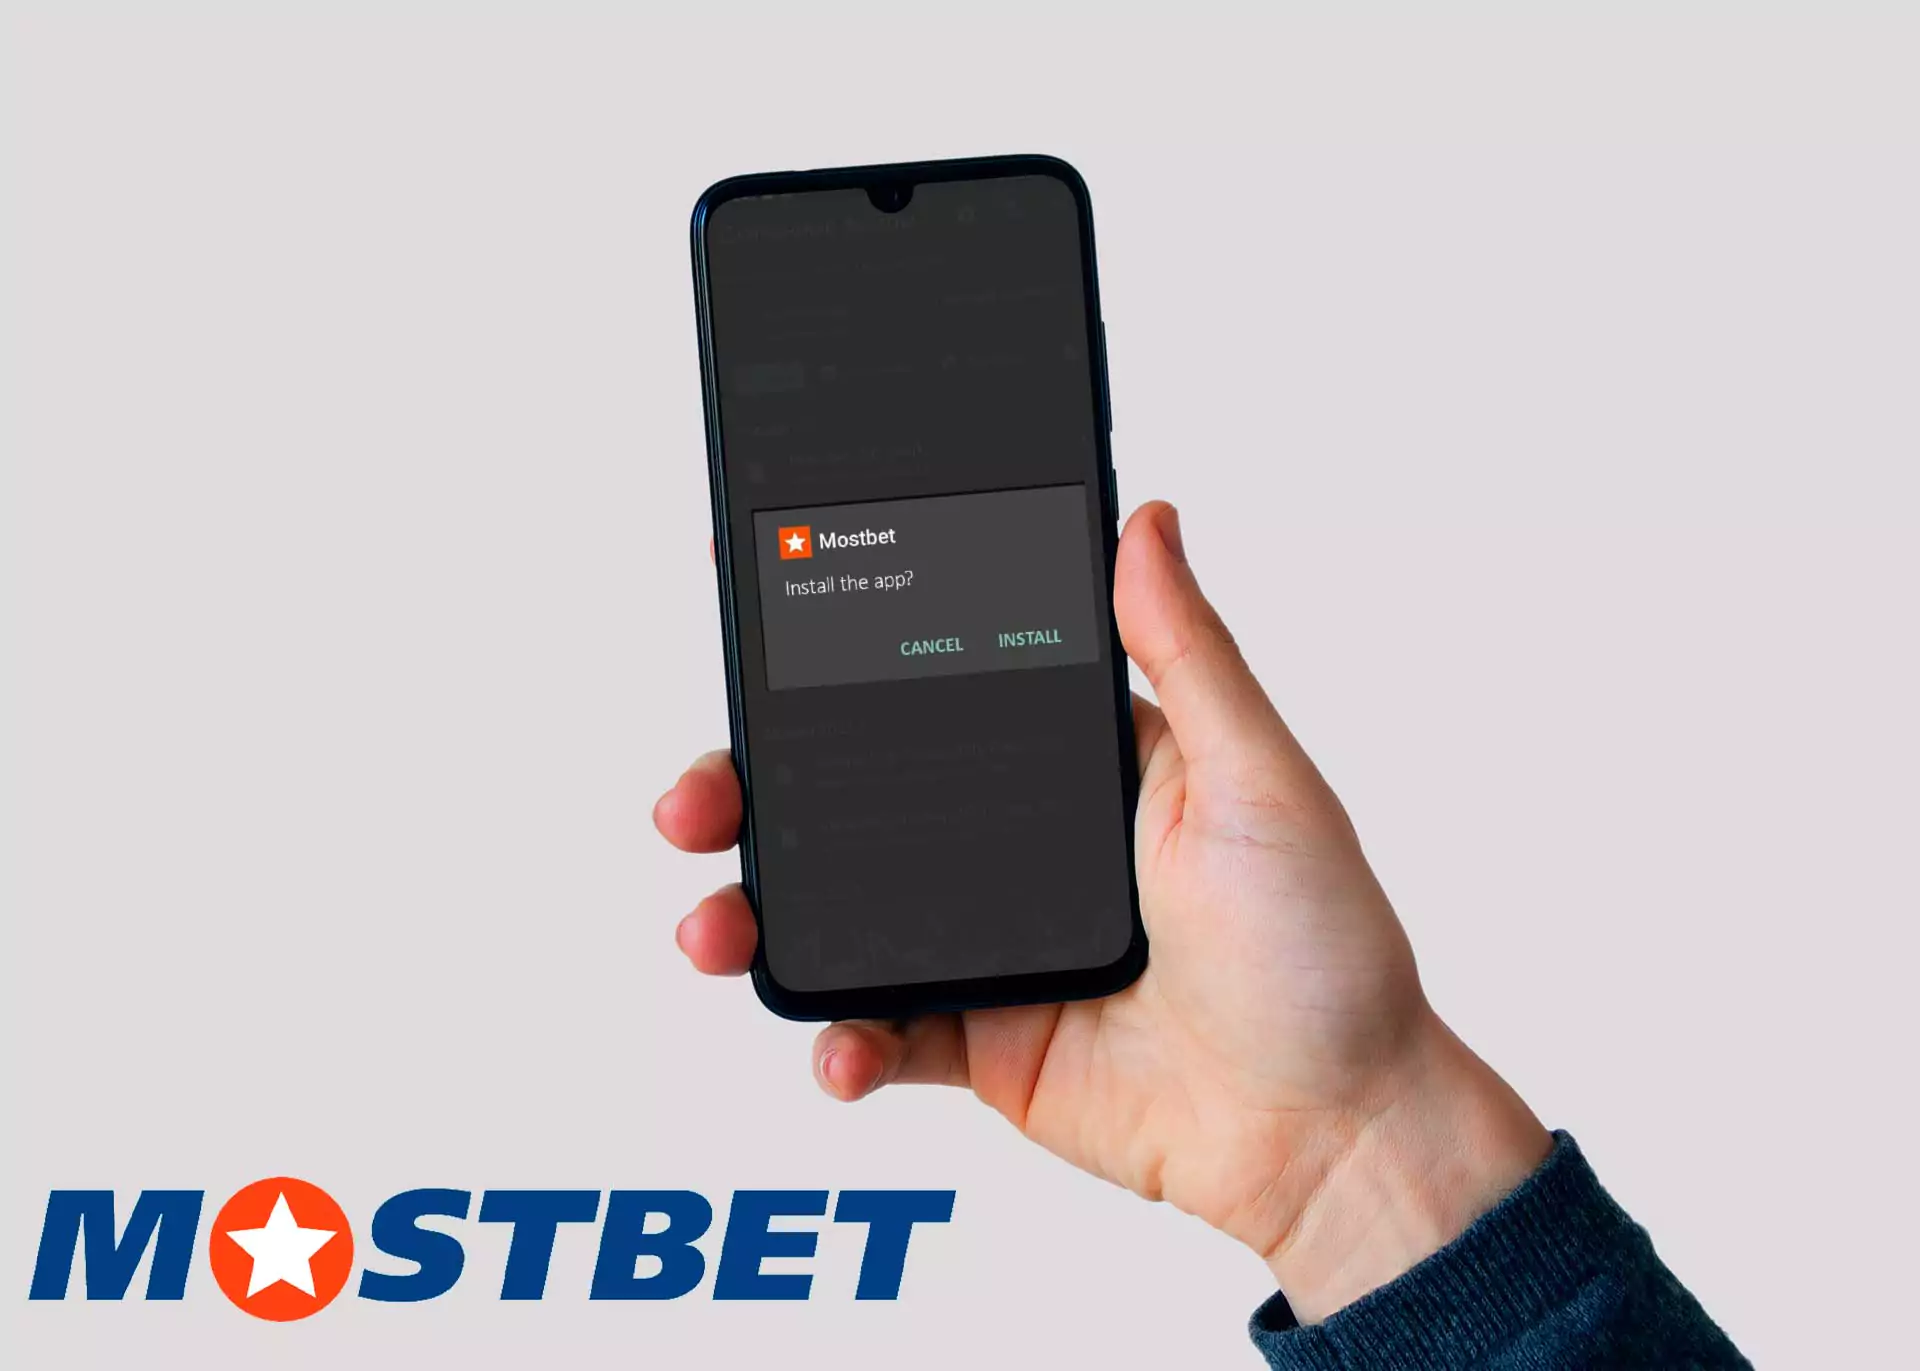 Start the installation of the Mostbet apk new version.